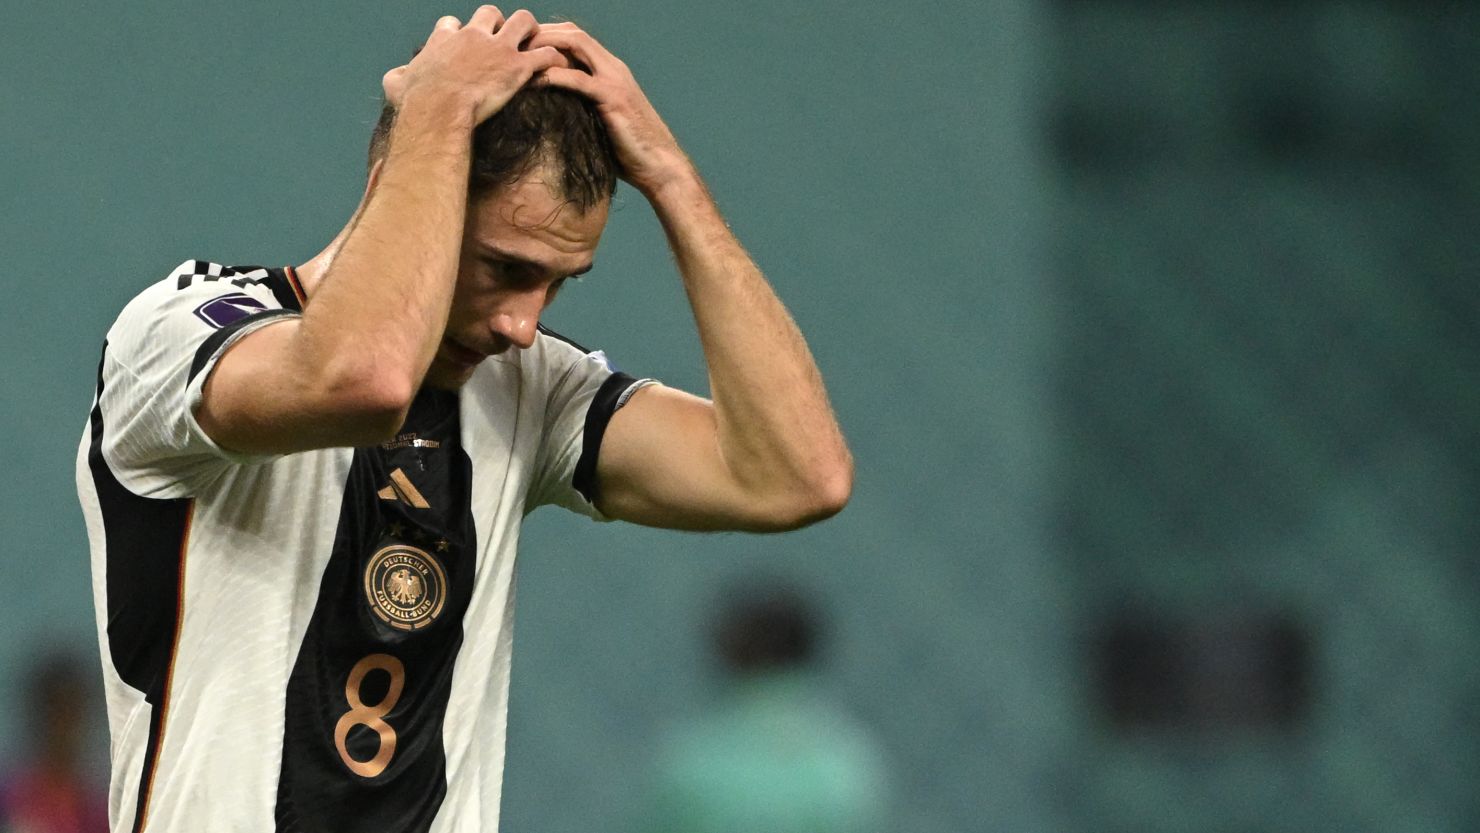 Germany was stunned by Japan in all-time great World Cup upset.